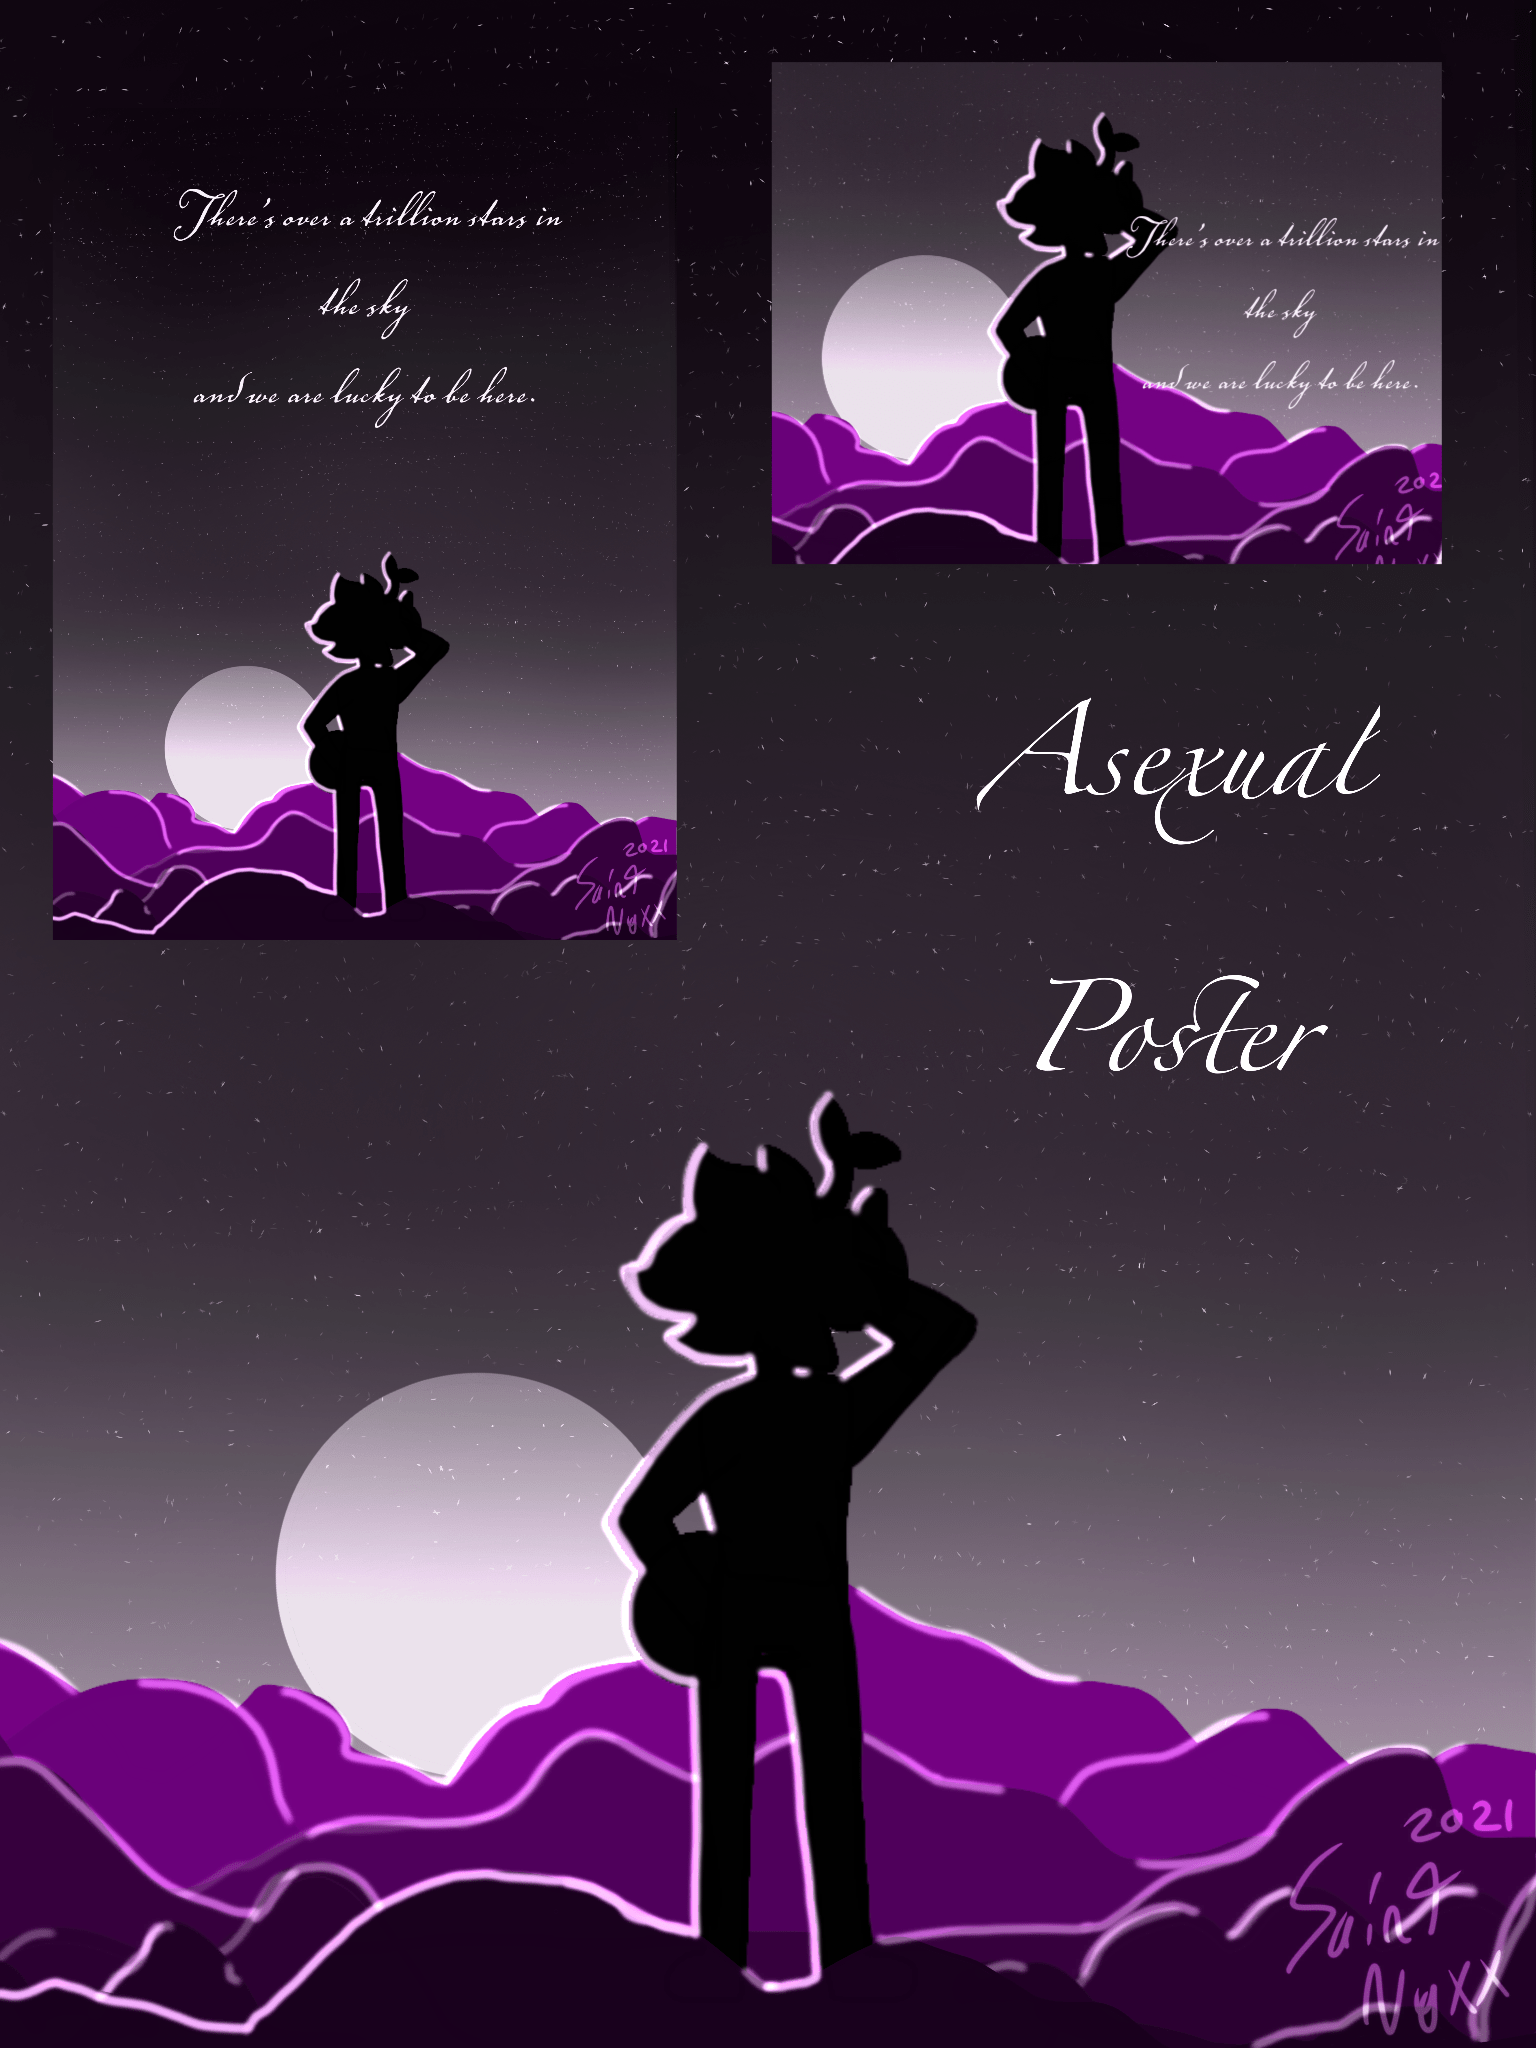 Asexual Poster, 2021. There's over a billion stars in the sky and we are lucky to be here. - Asexual